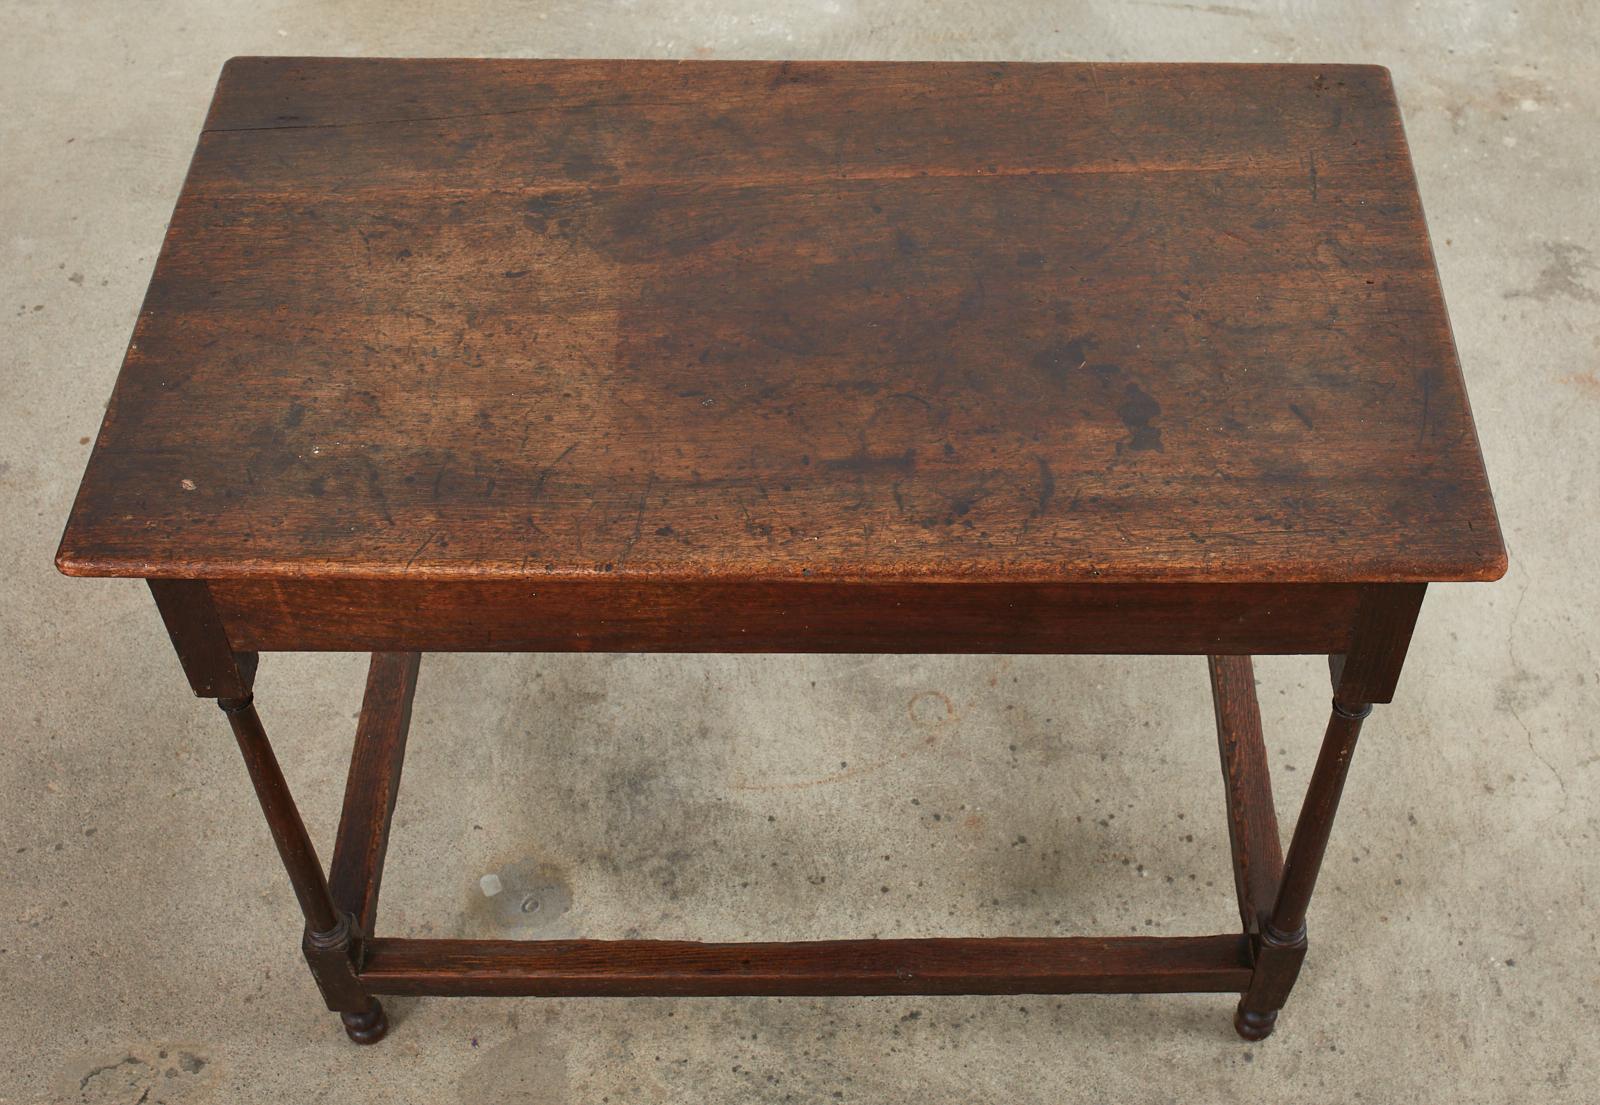 Hand-Crafted 19th Century English Oak Pub Tavern or Wine Table